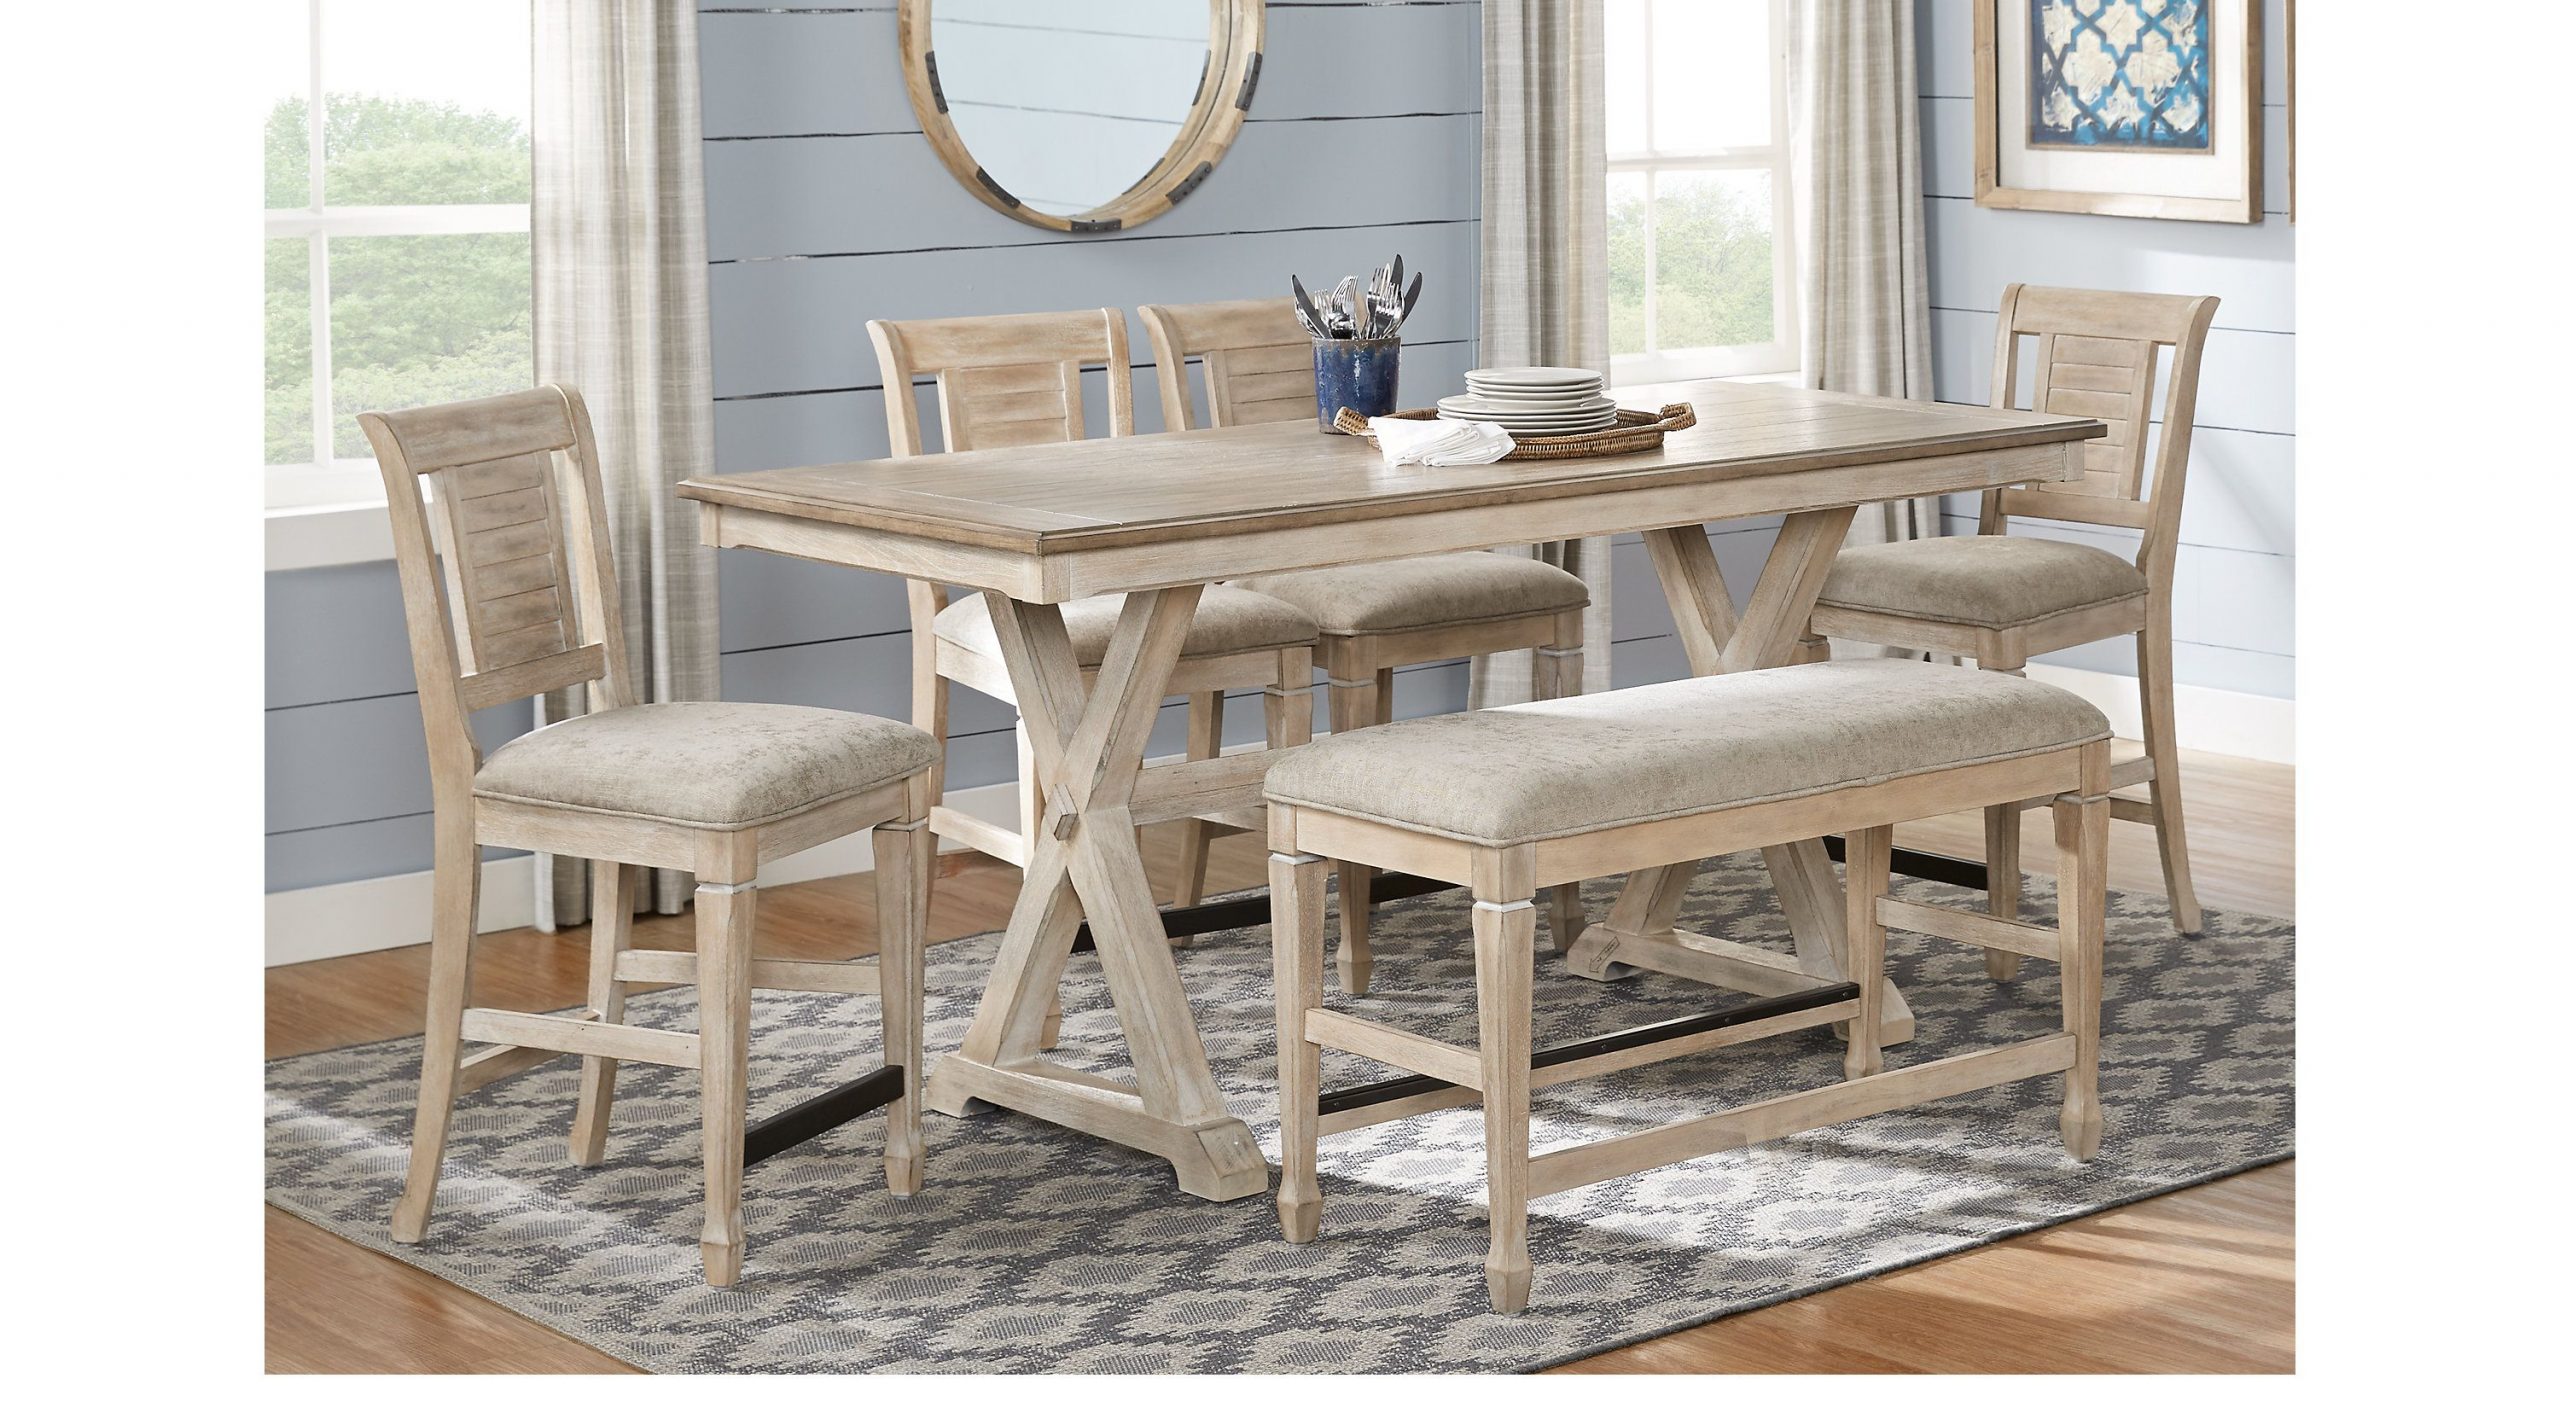 Nantucket Breeze Bisque 3 Pc Counter Height Dining Room in size 3000 X 1663